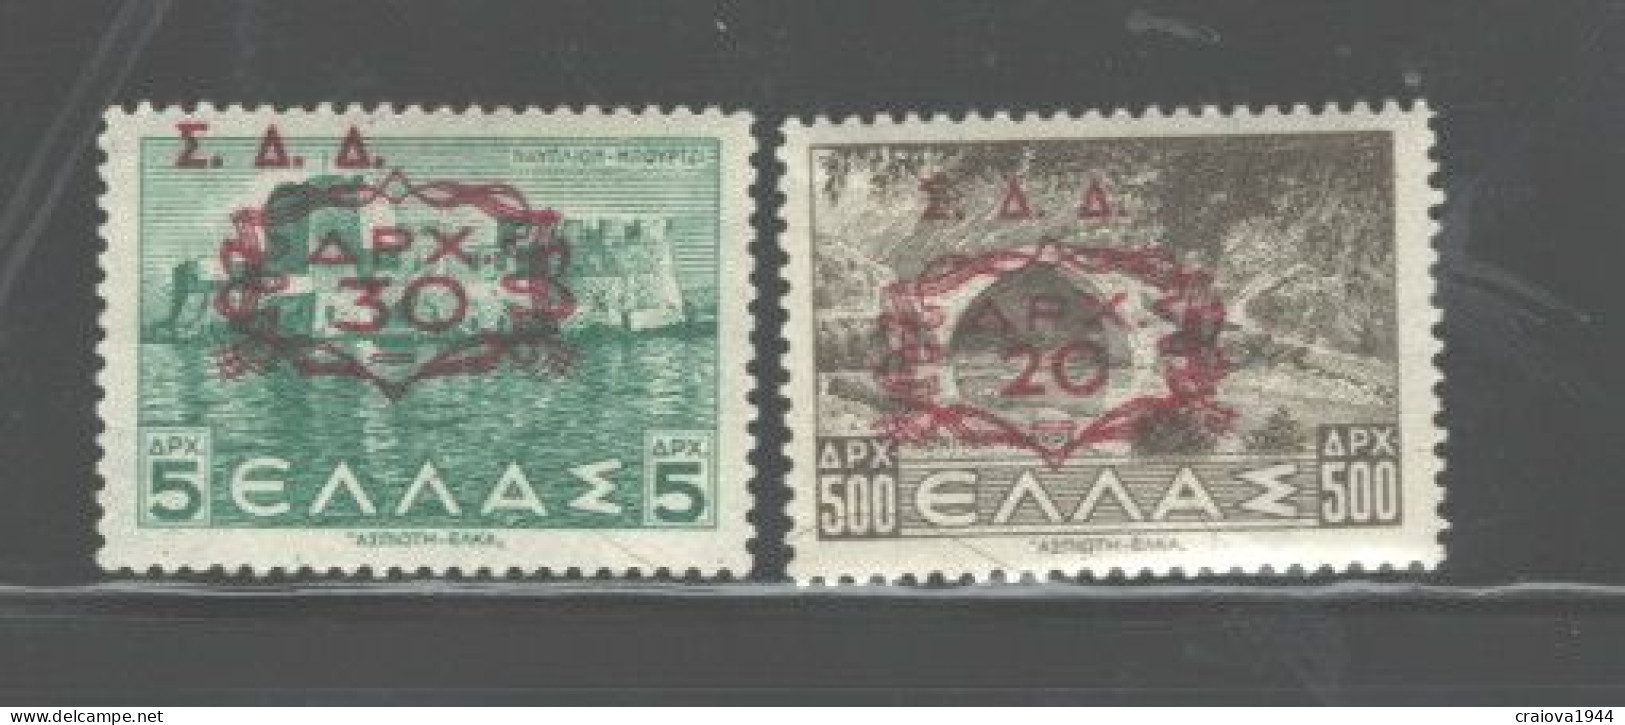 GREECE STAMPS,1947 #N243-N244 OVERPRINT, USED IN DODECANESE ISL. - Dodecanese